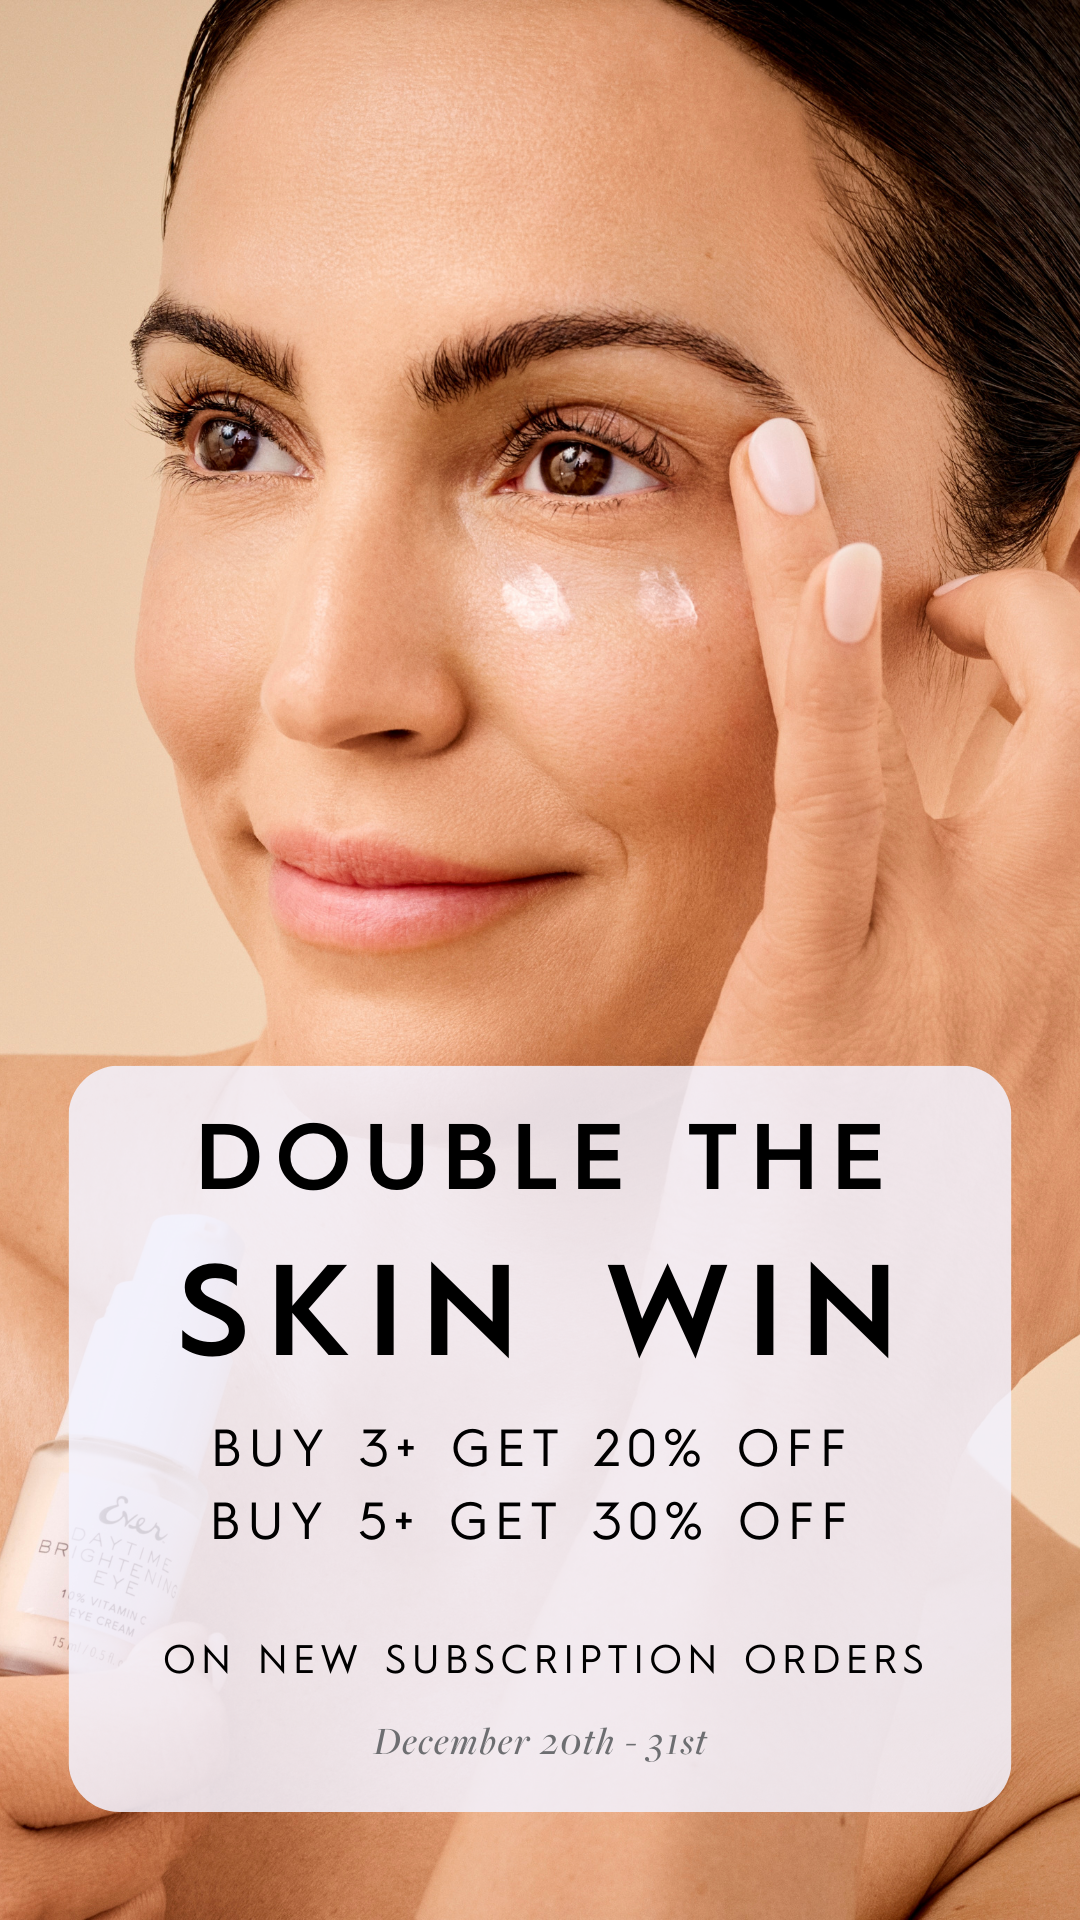 Double The Skin Win on New Subscription Orders